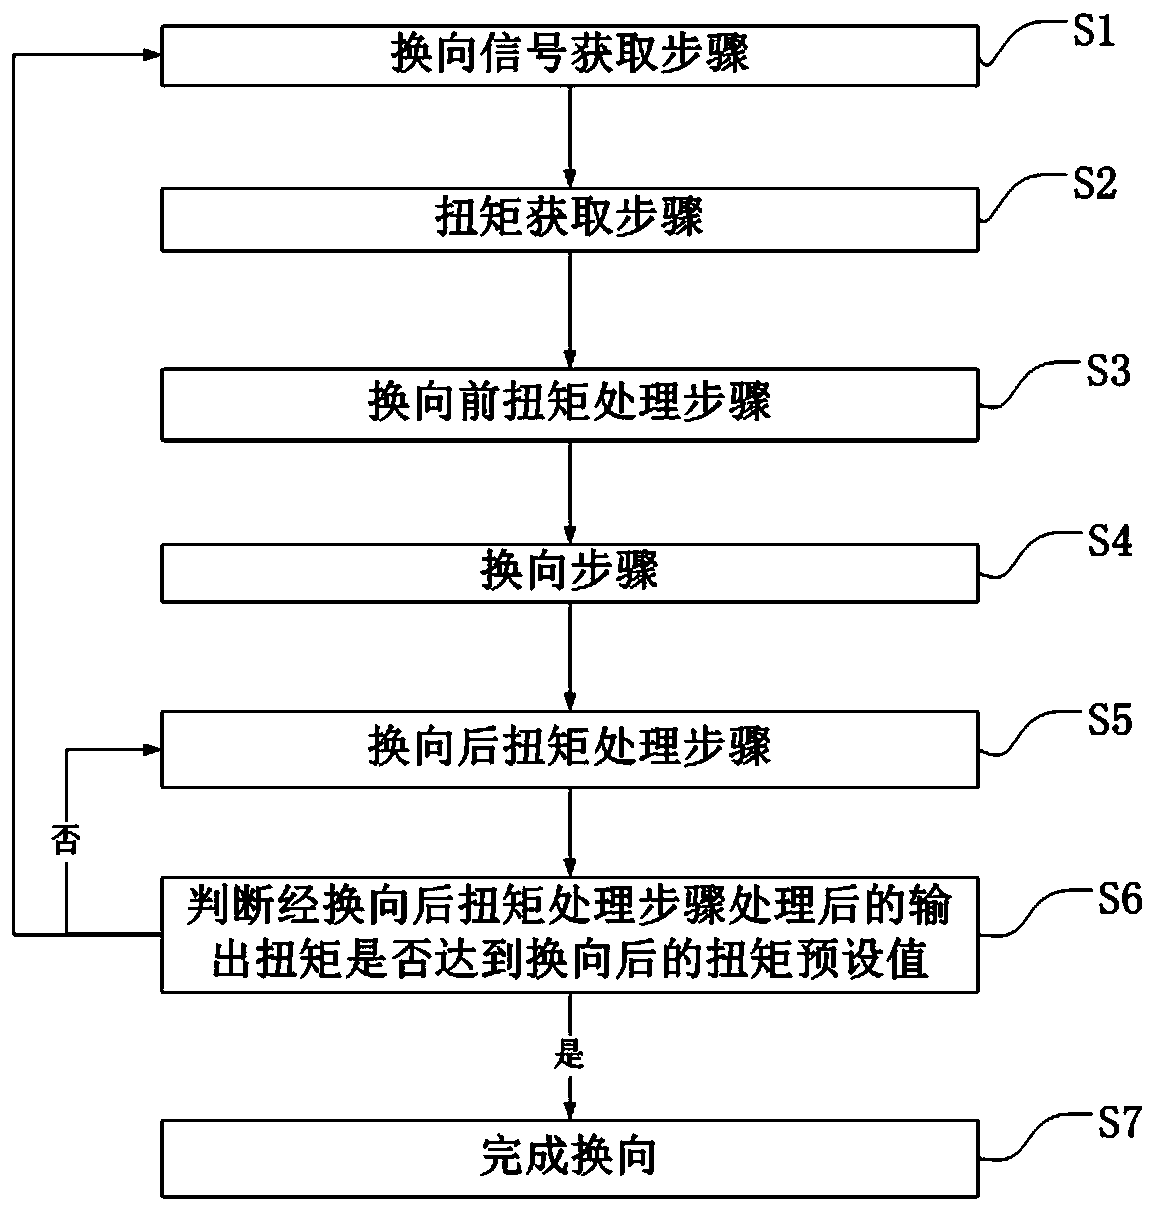 Tooth surface reversing anti-shake control method for electric vehicle